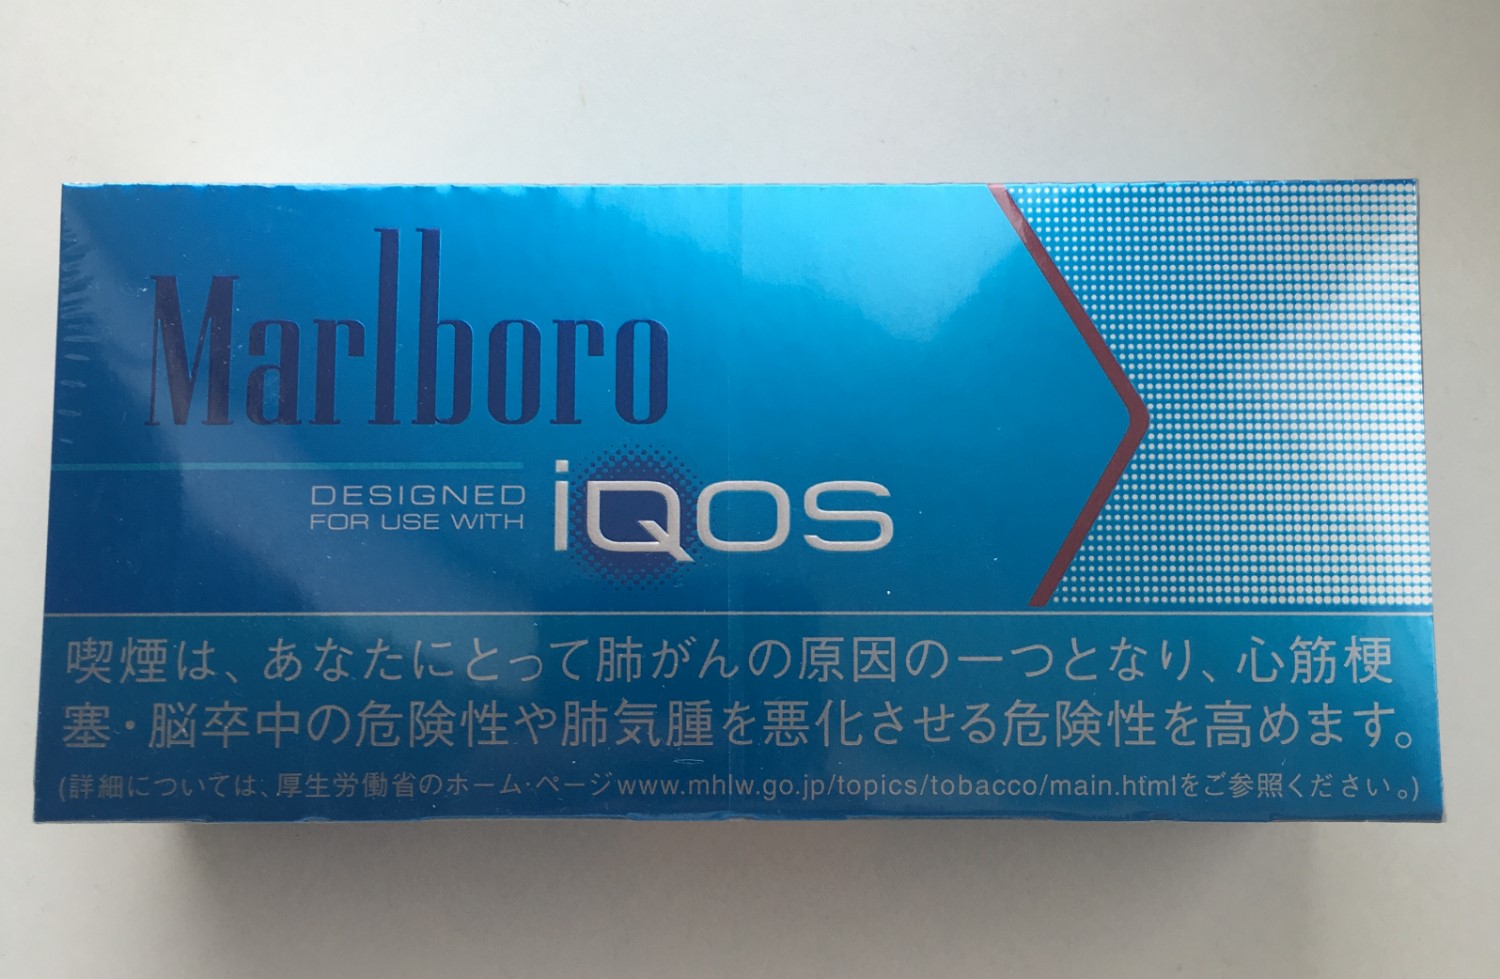 In some countries IQOS is sold like packs of cigarettes